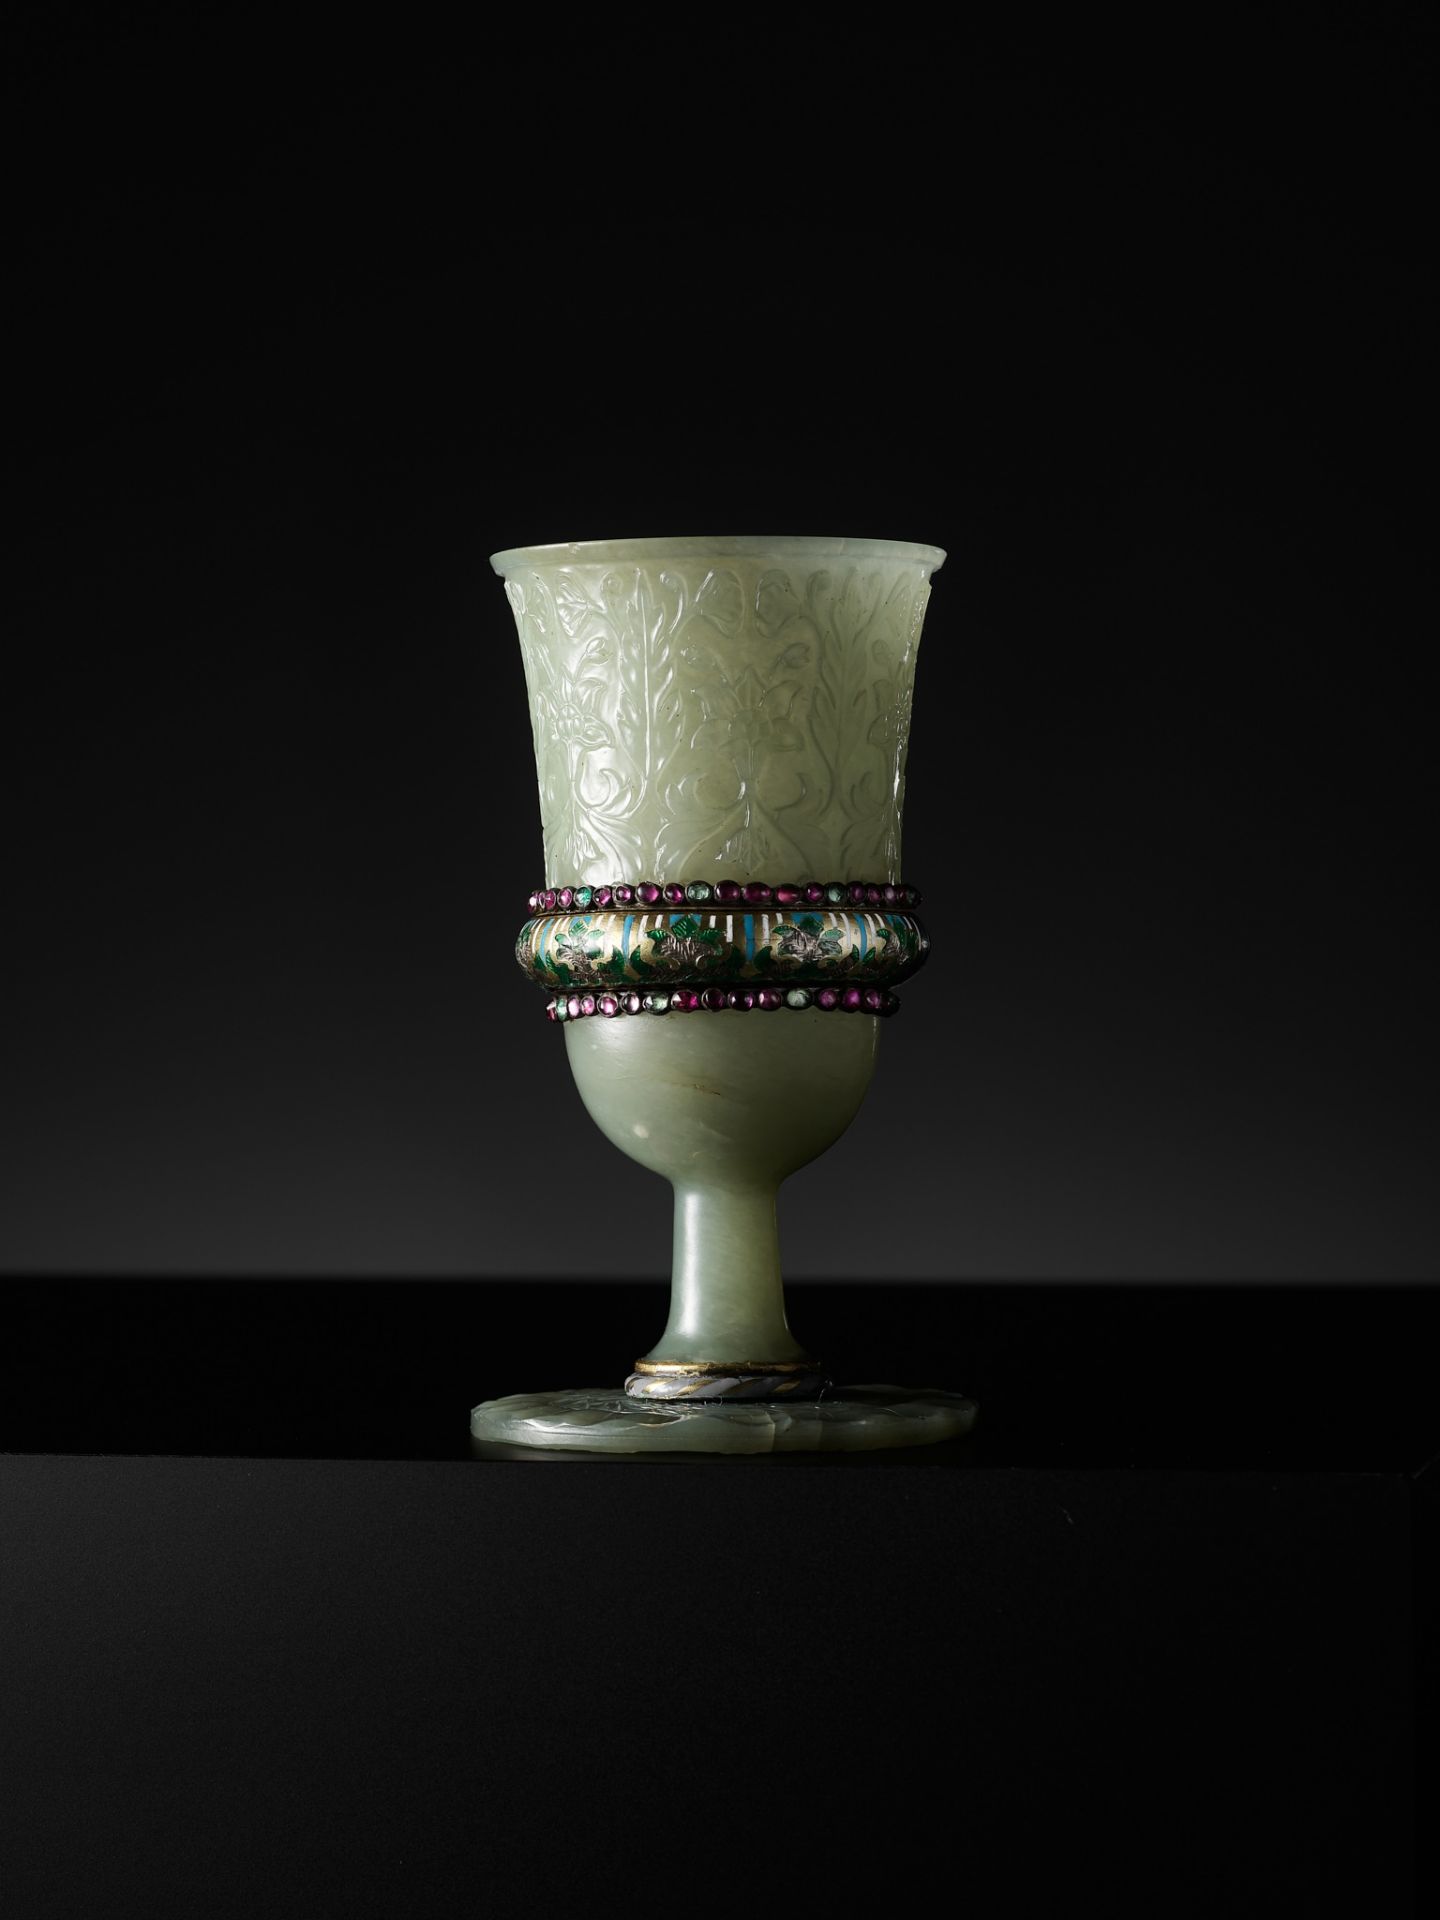 A MUGHAL GILT AND 'GEM'-INLAID JADE STEM CUP, INDIA, 18TH CENTURY - Image 3 of 11